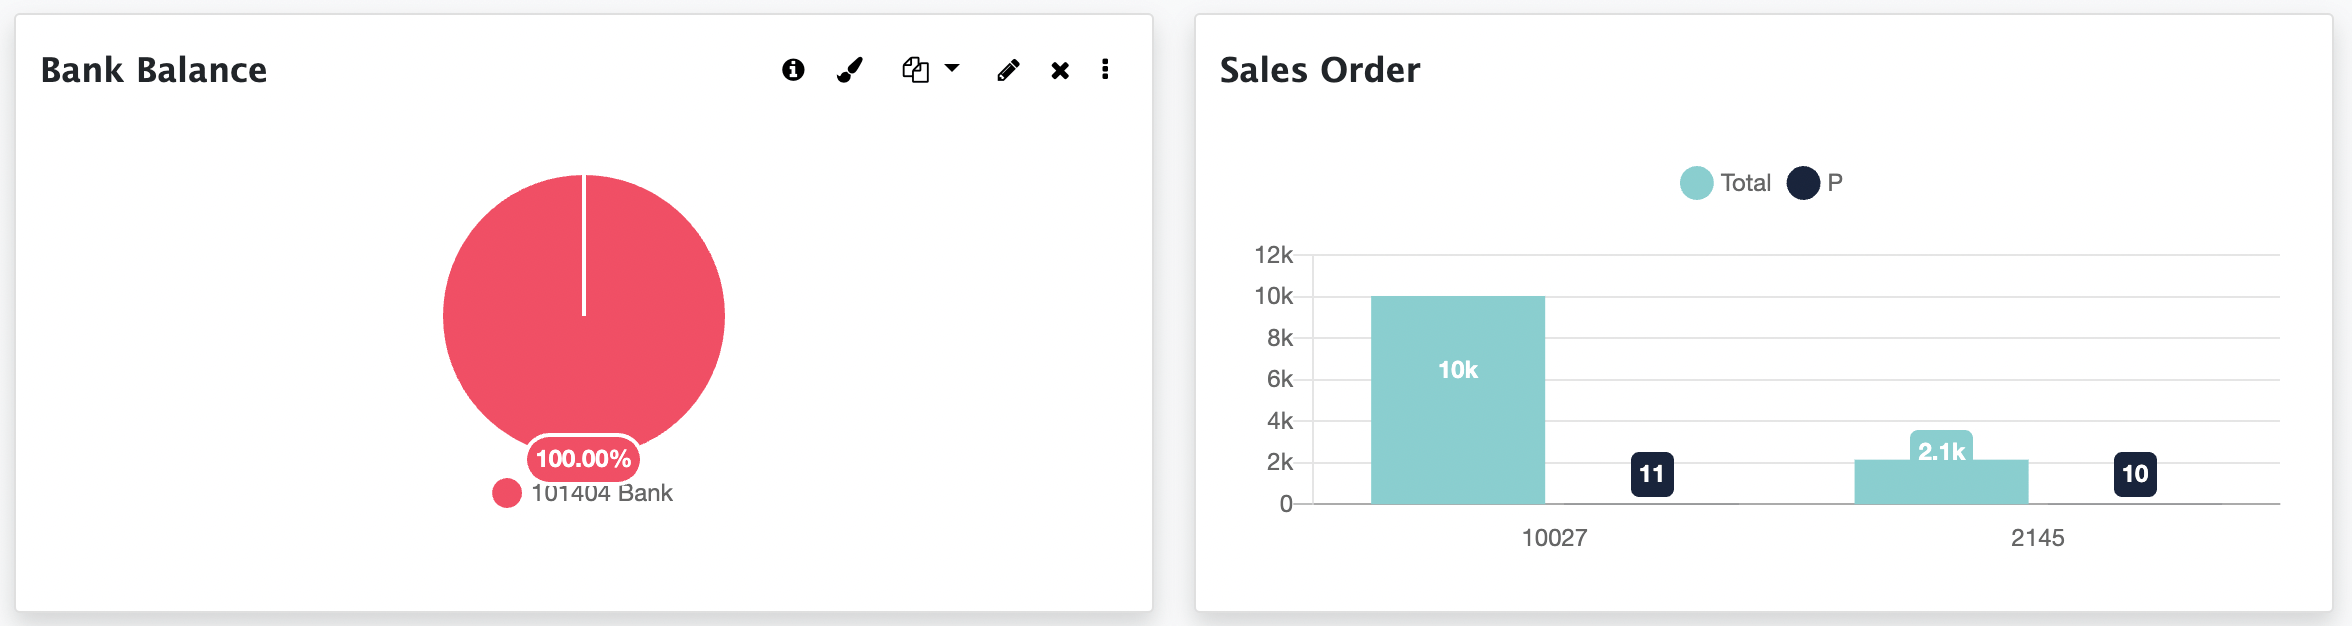 personalized, and strong dashboards